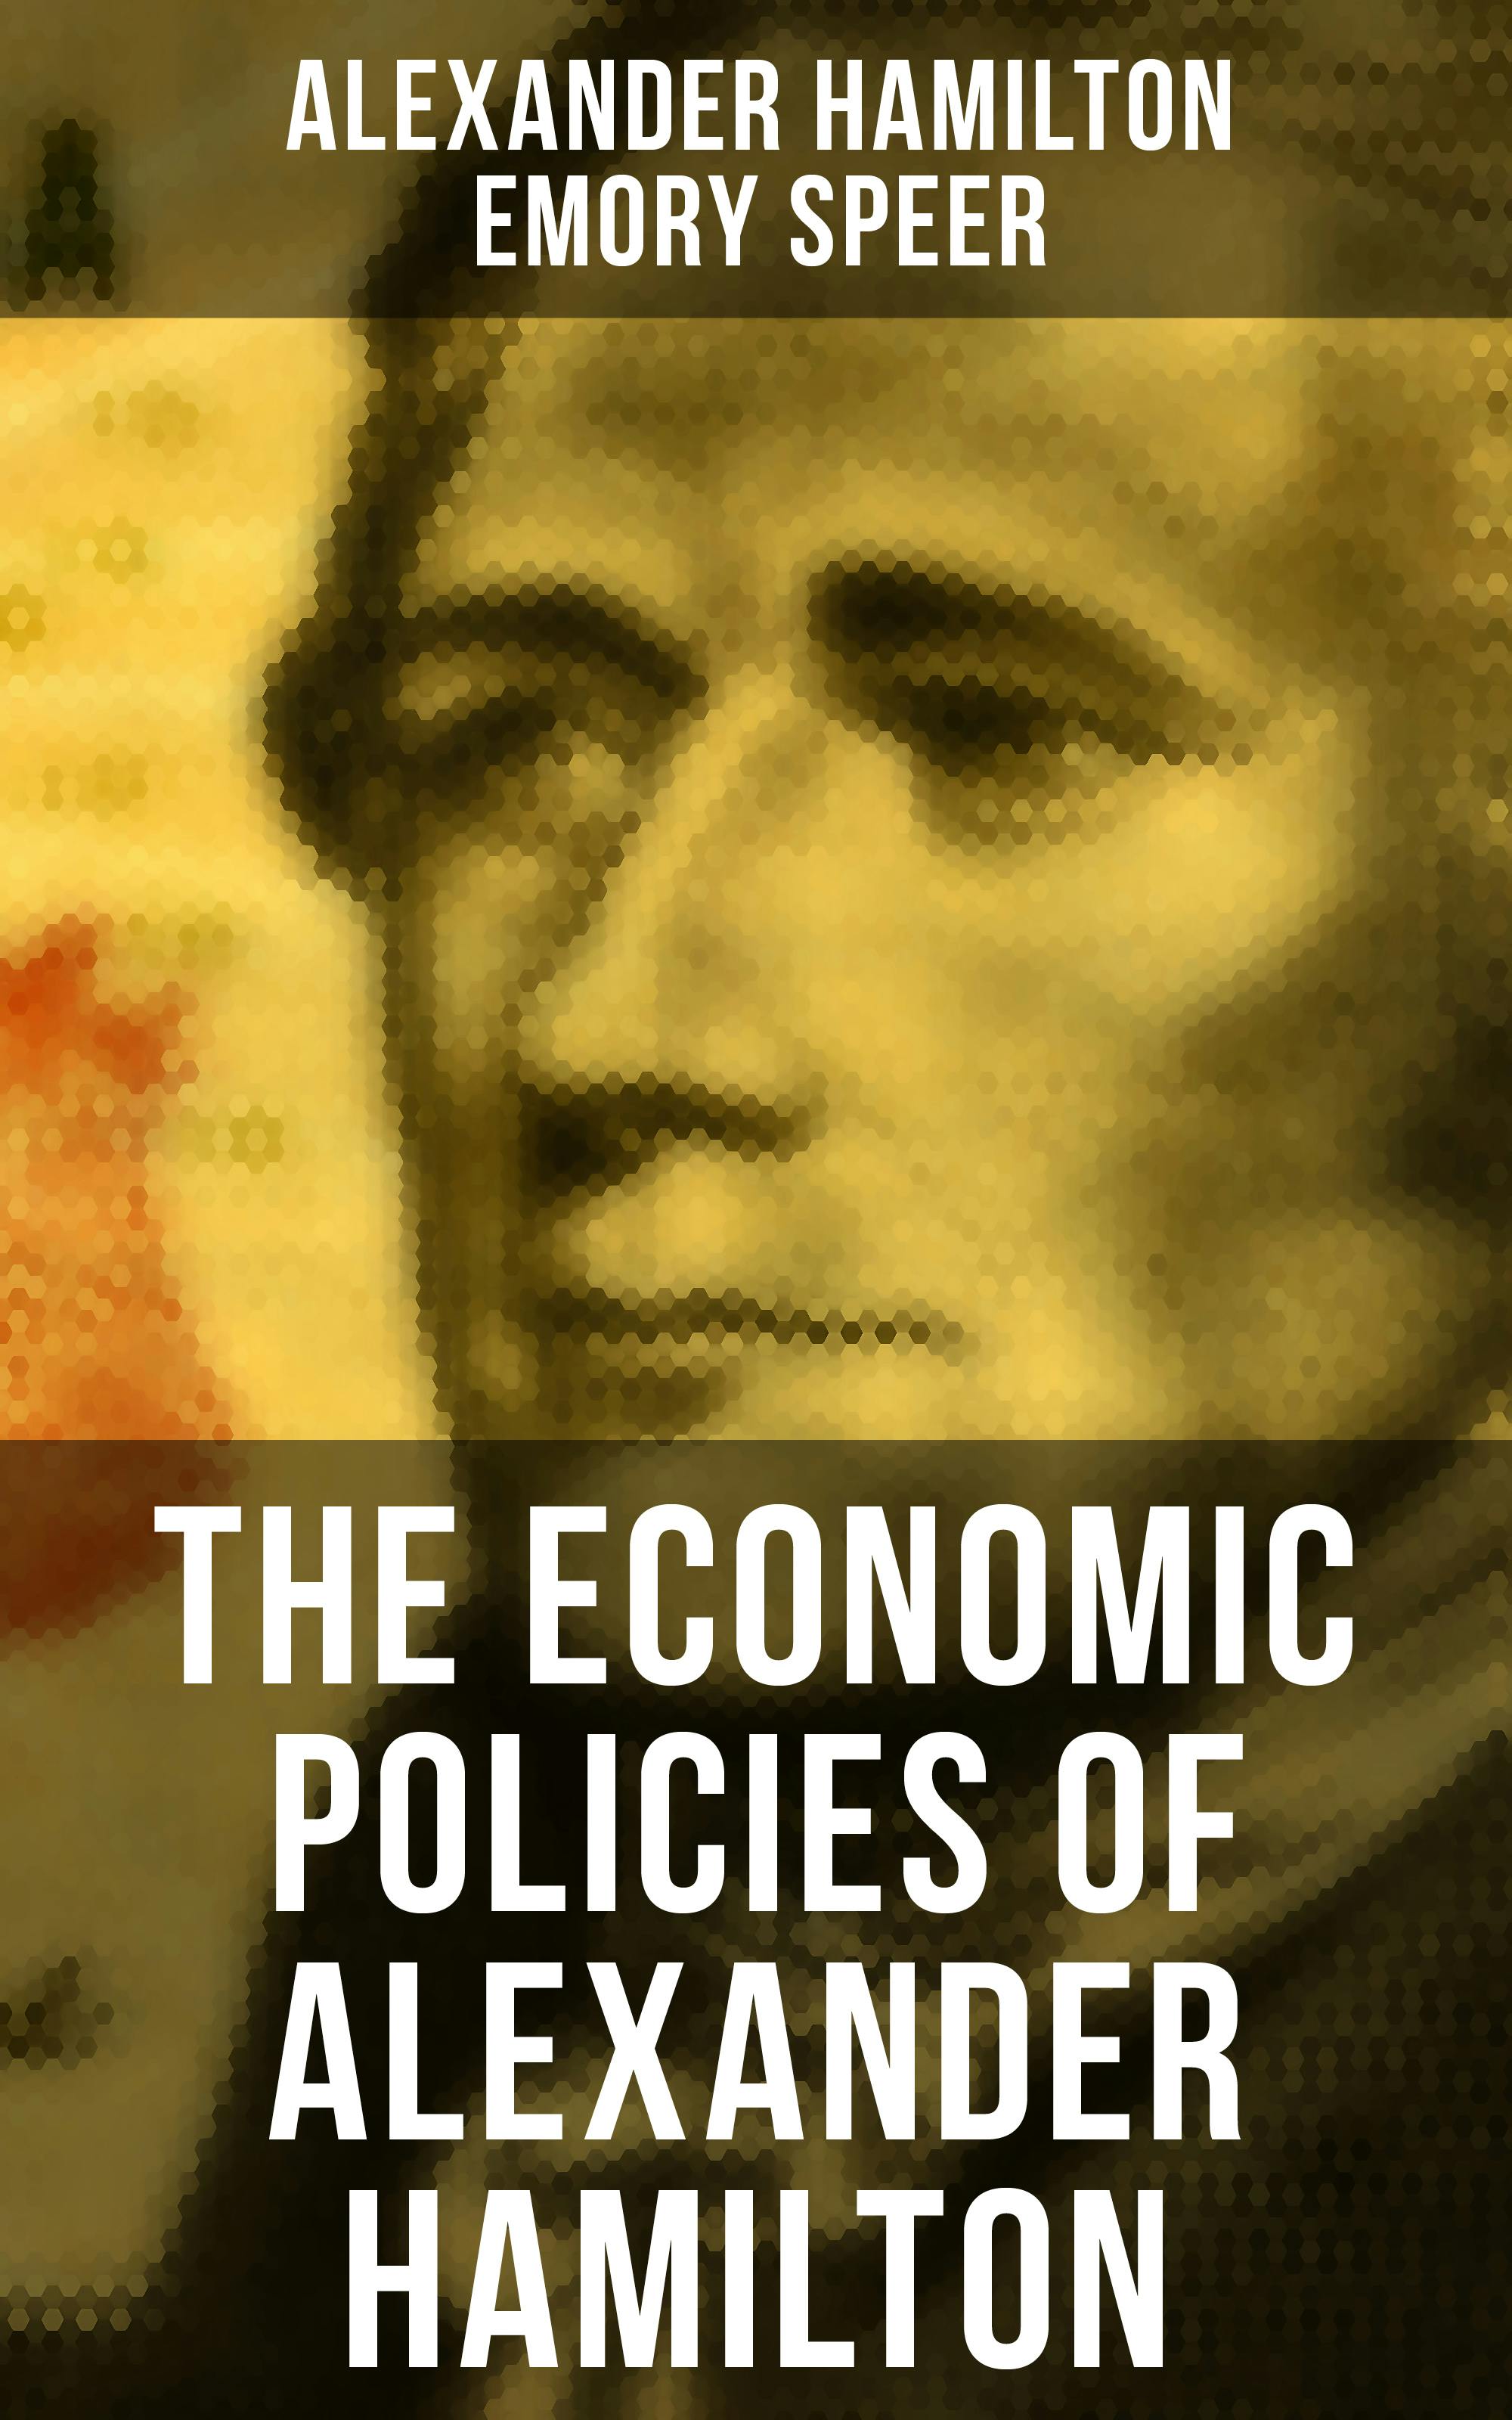 The Economic Policies of Alexander Hamilton: Works & Speeches of the Founder of American Financial System - Alexander Hamilton, Emory Speer